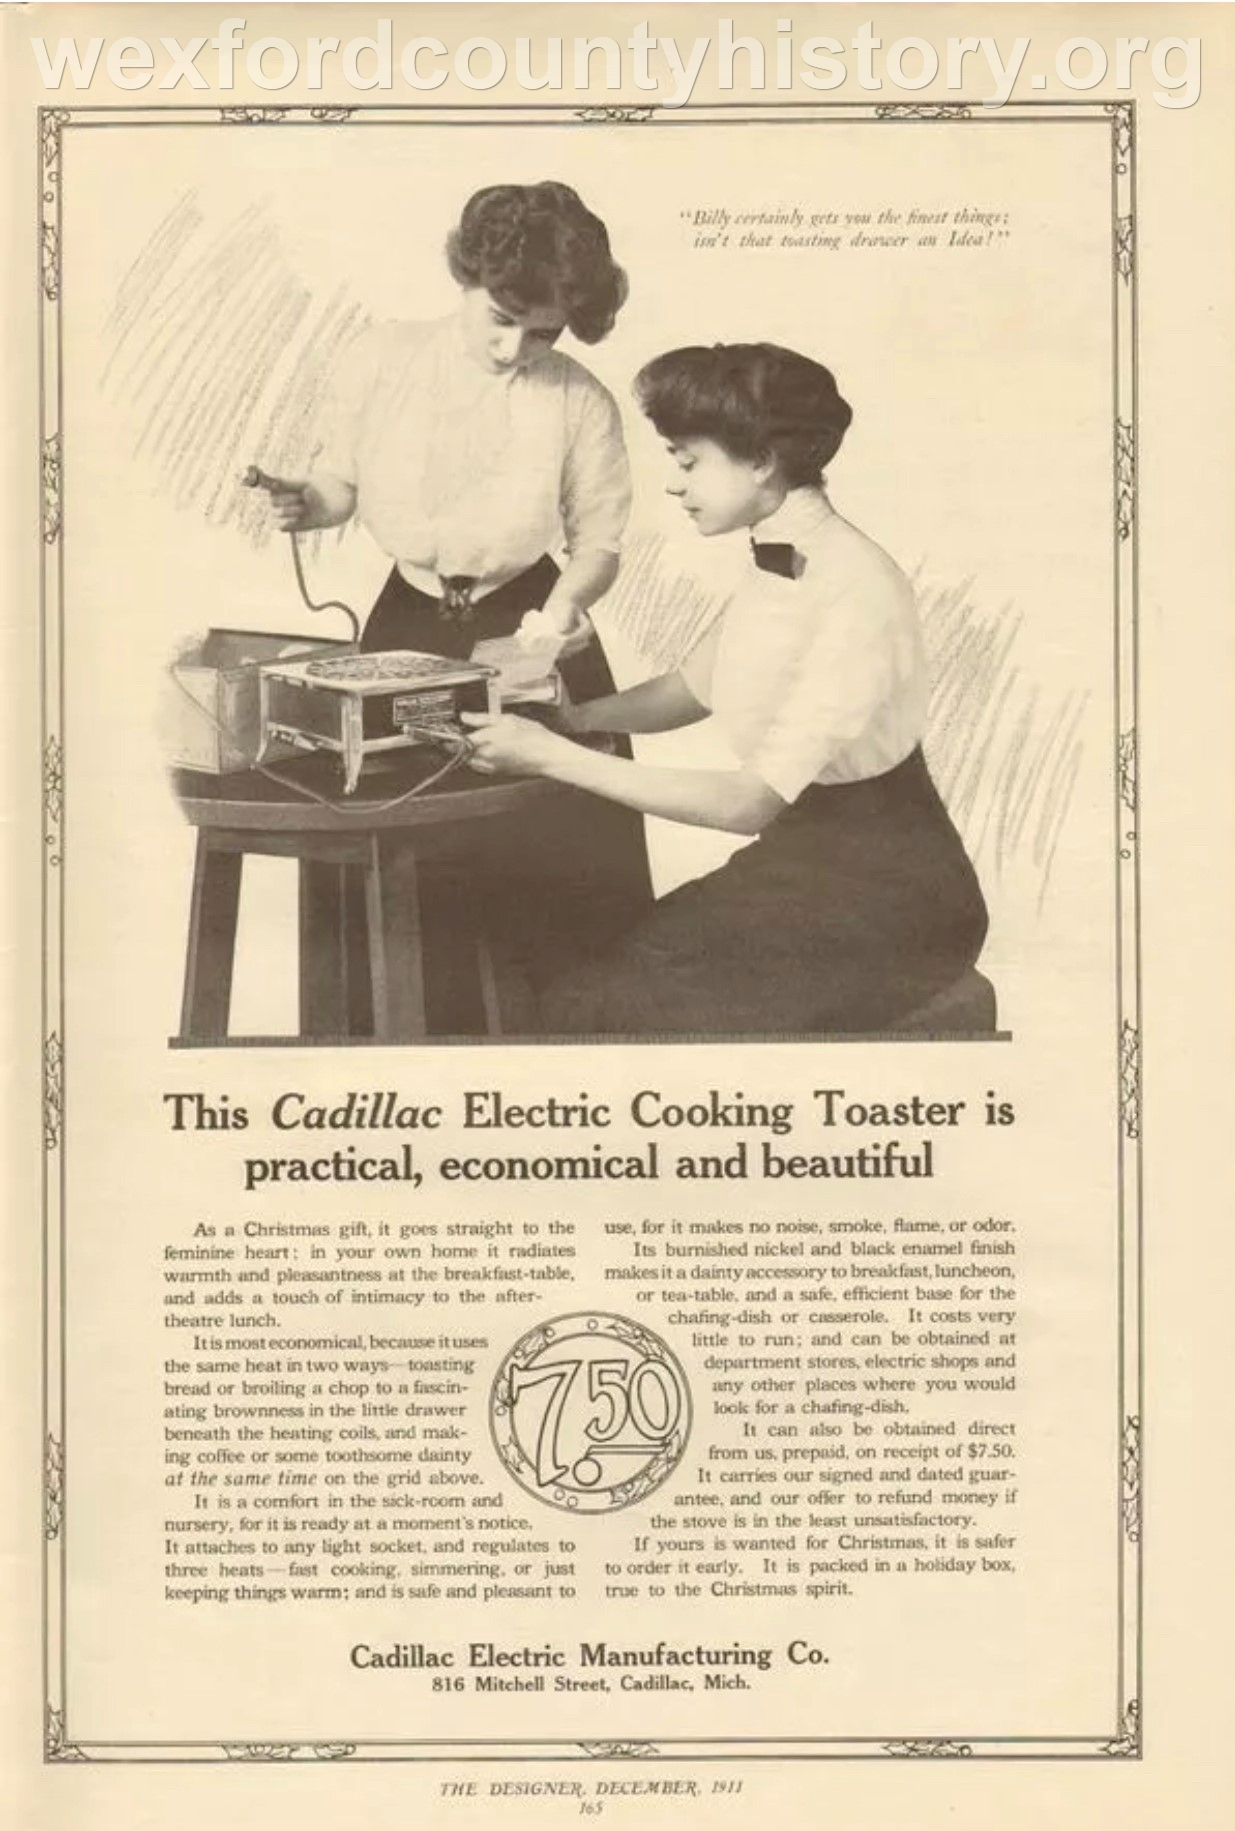 Cadillac-Business-Cadillac-Electric-Manufacturing-Company-Toaster